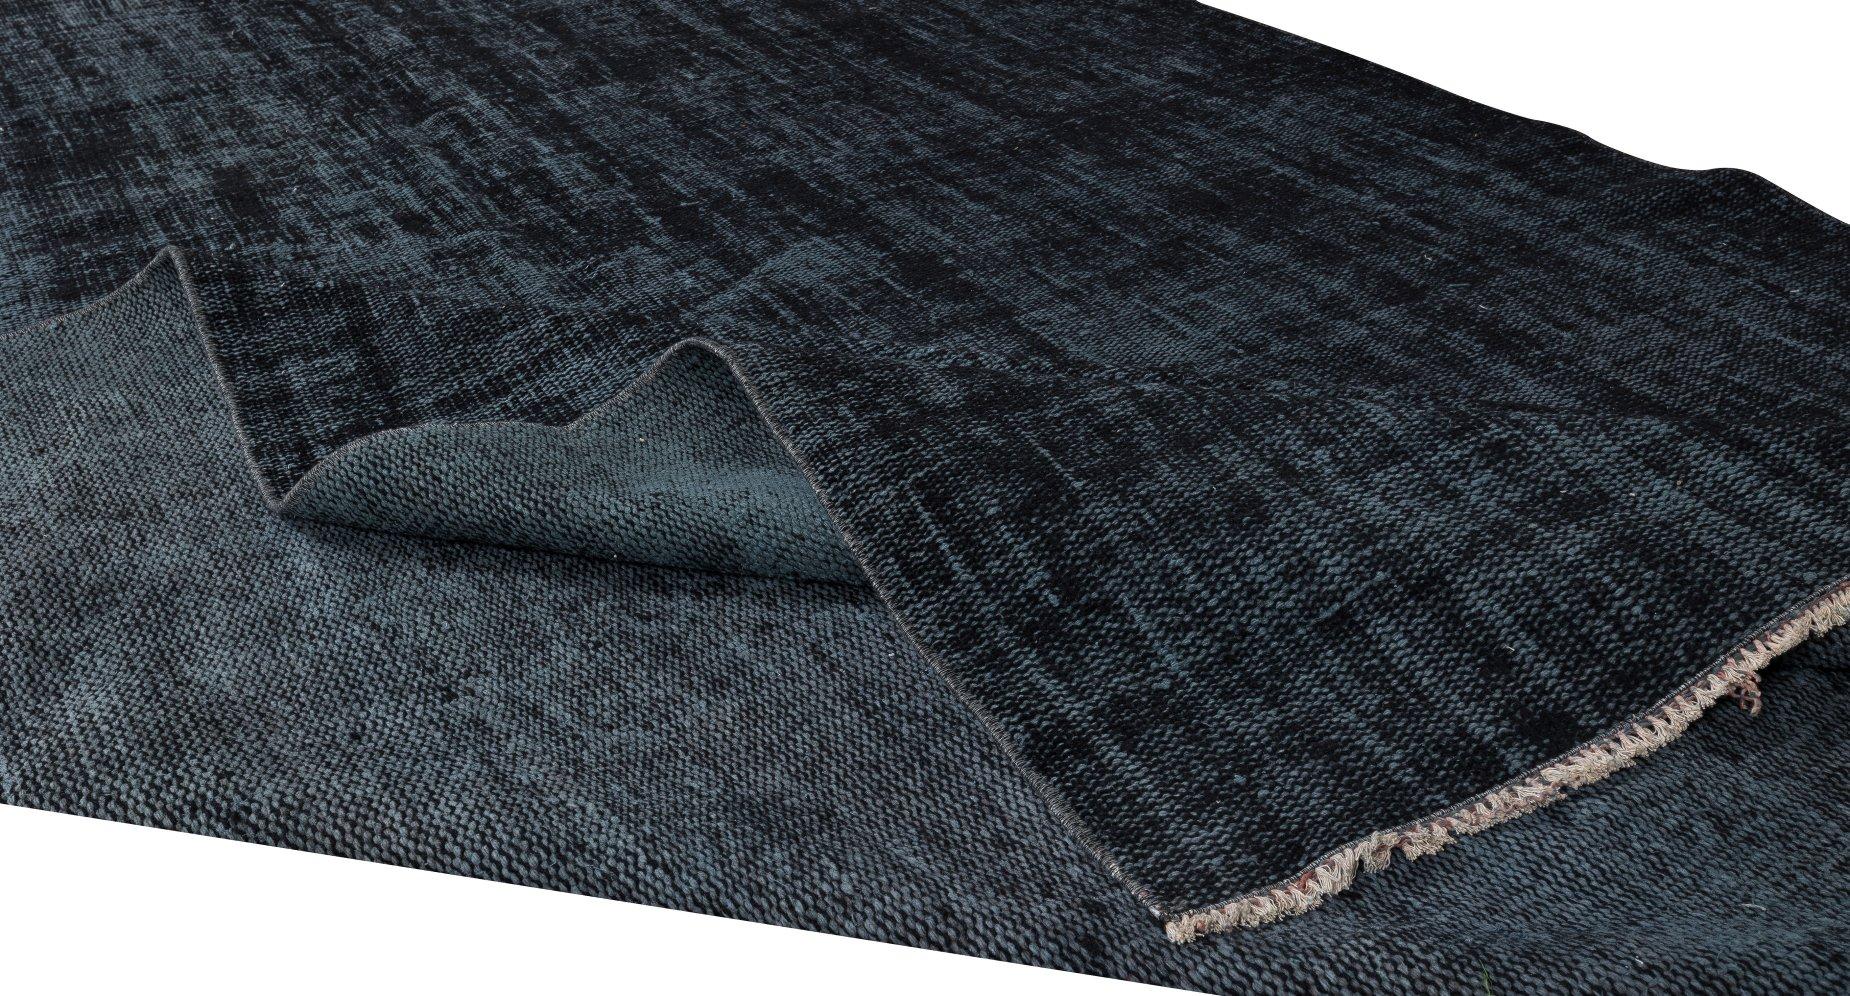 Hand-Knotted 6.6x10.6 Ft Black Re-Dyed Rug for Modern Interior, 1960s Handmade Turkish Carpet